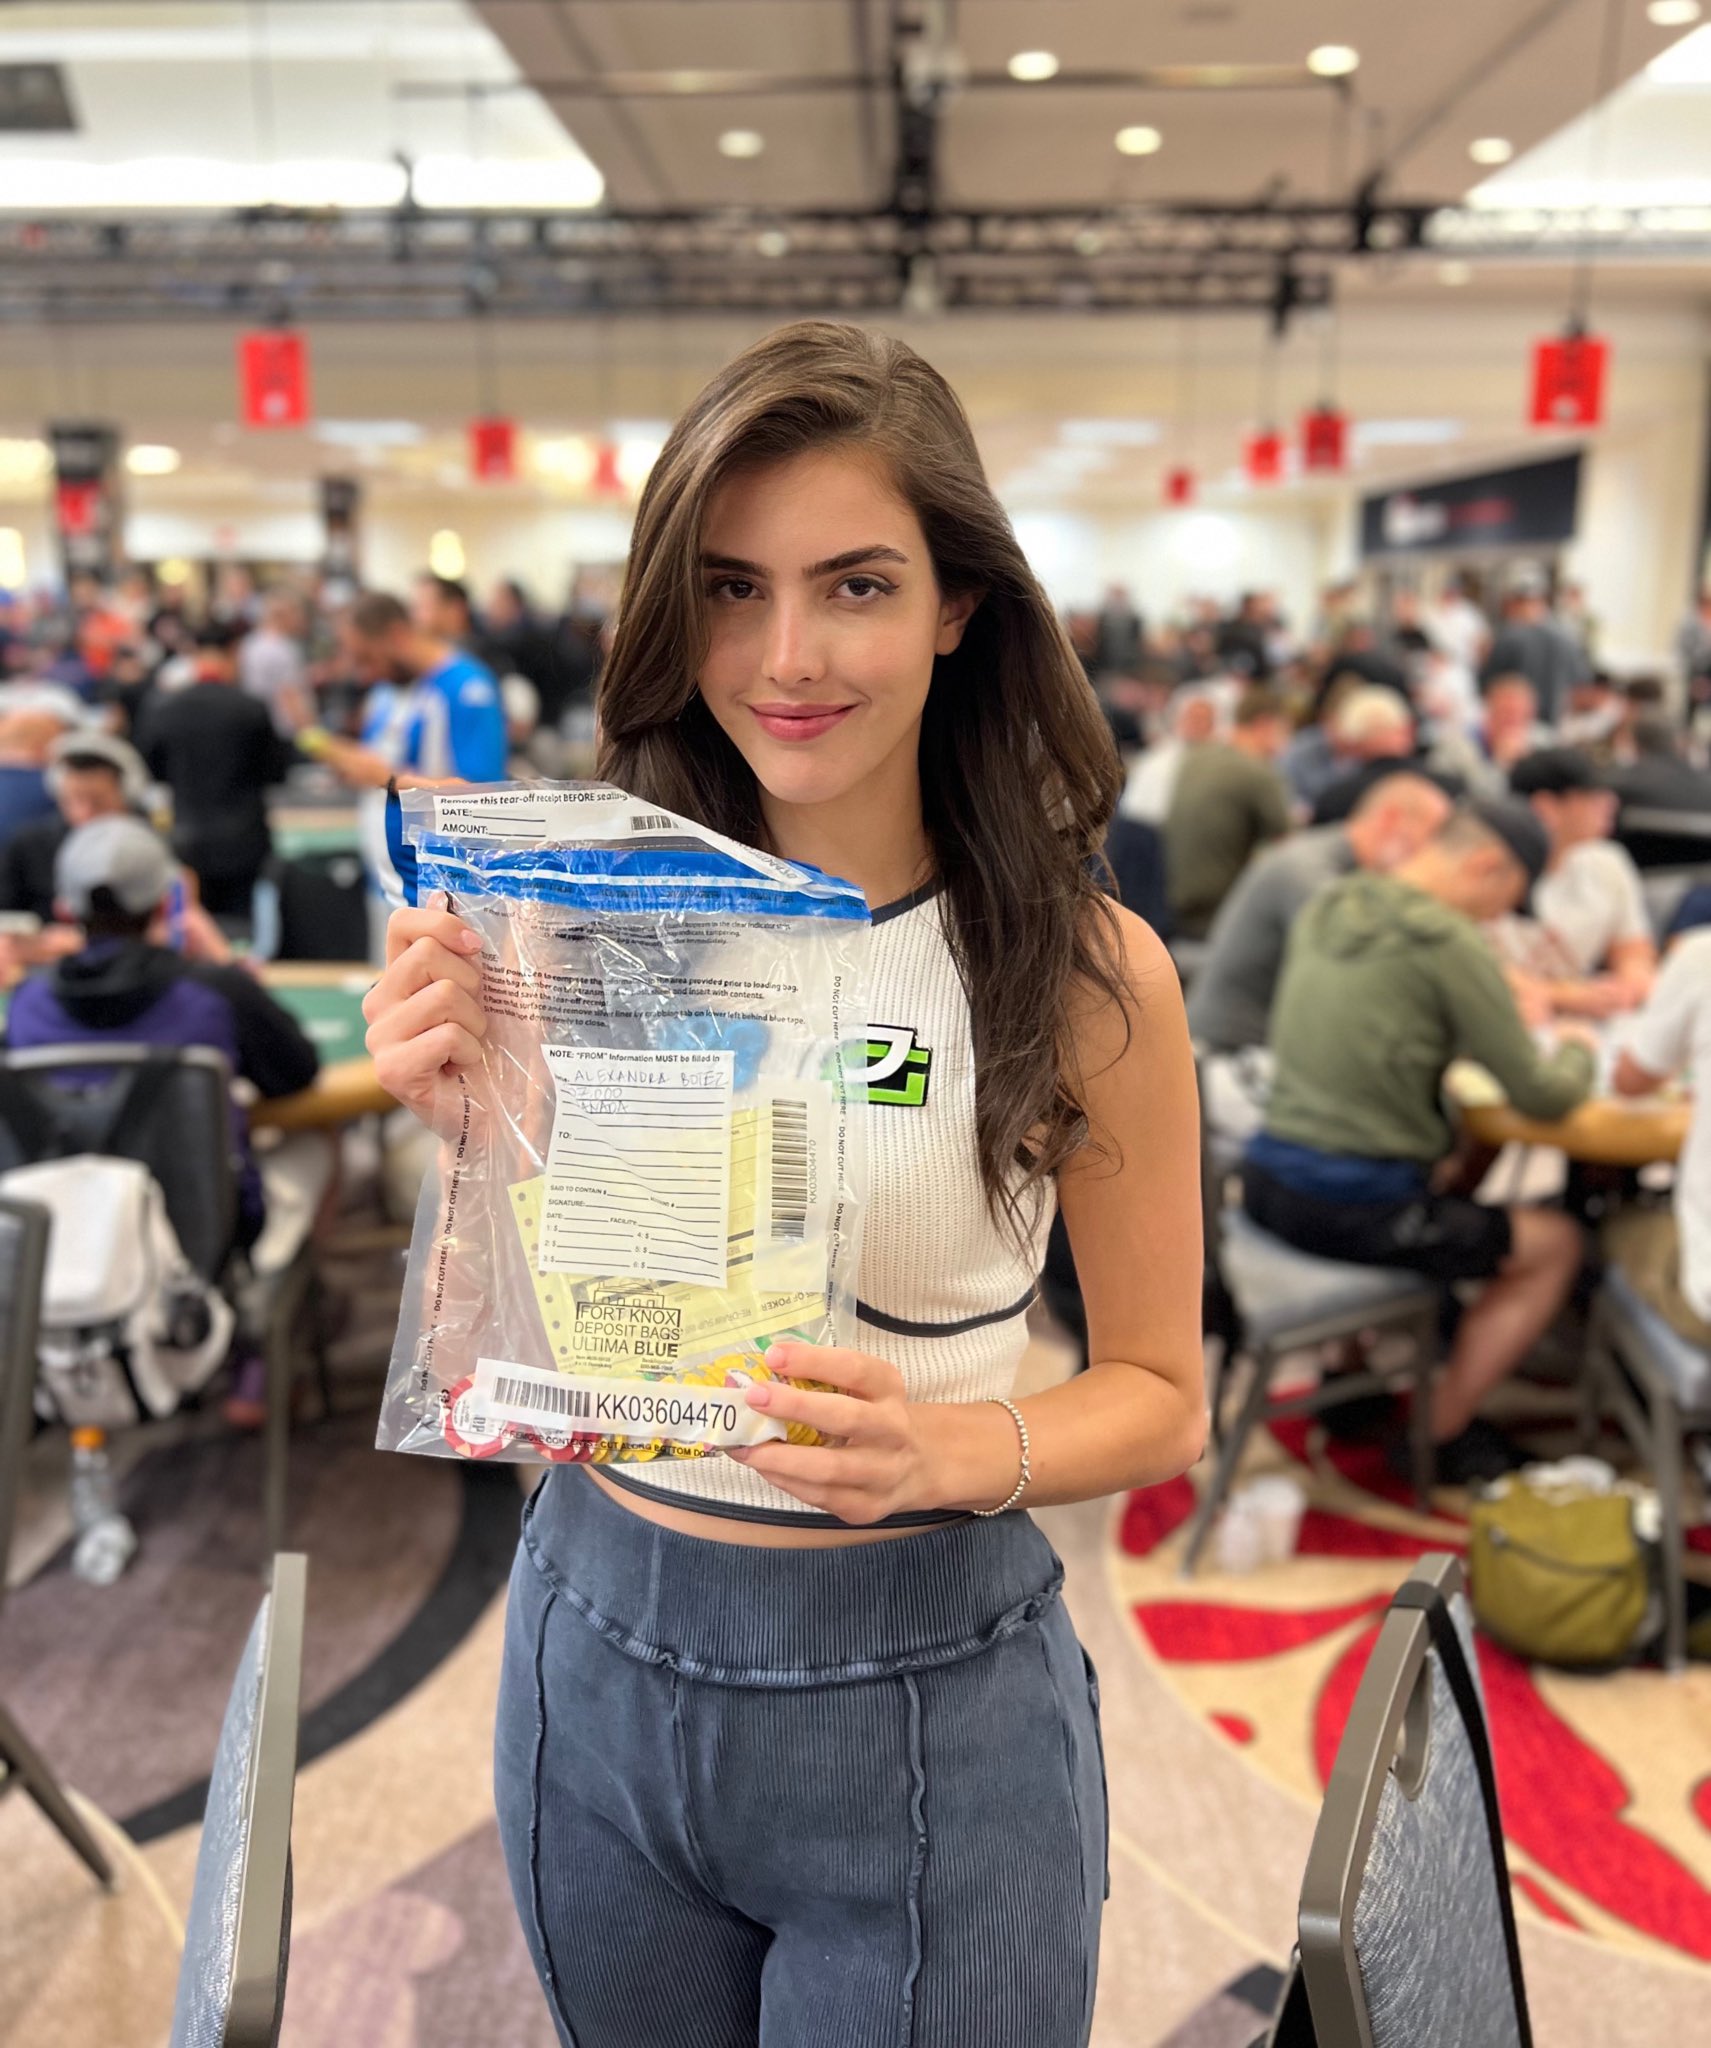 Alexandra Botez Dons 888poker Patch, Goes Deep in Main Event